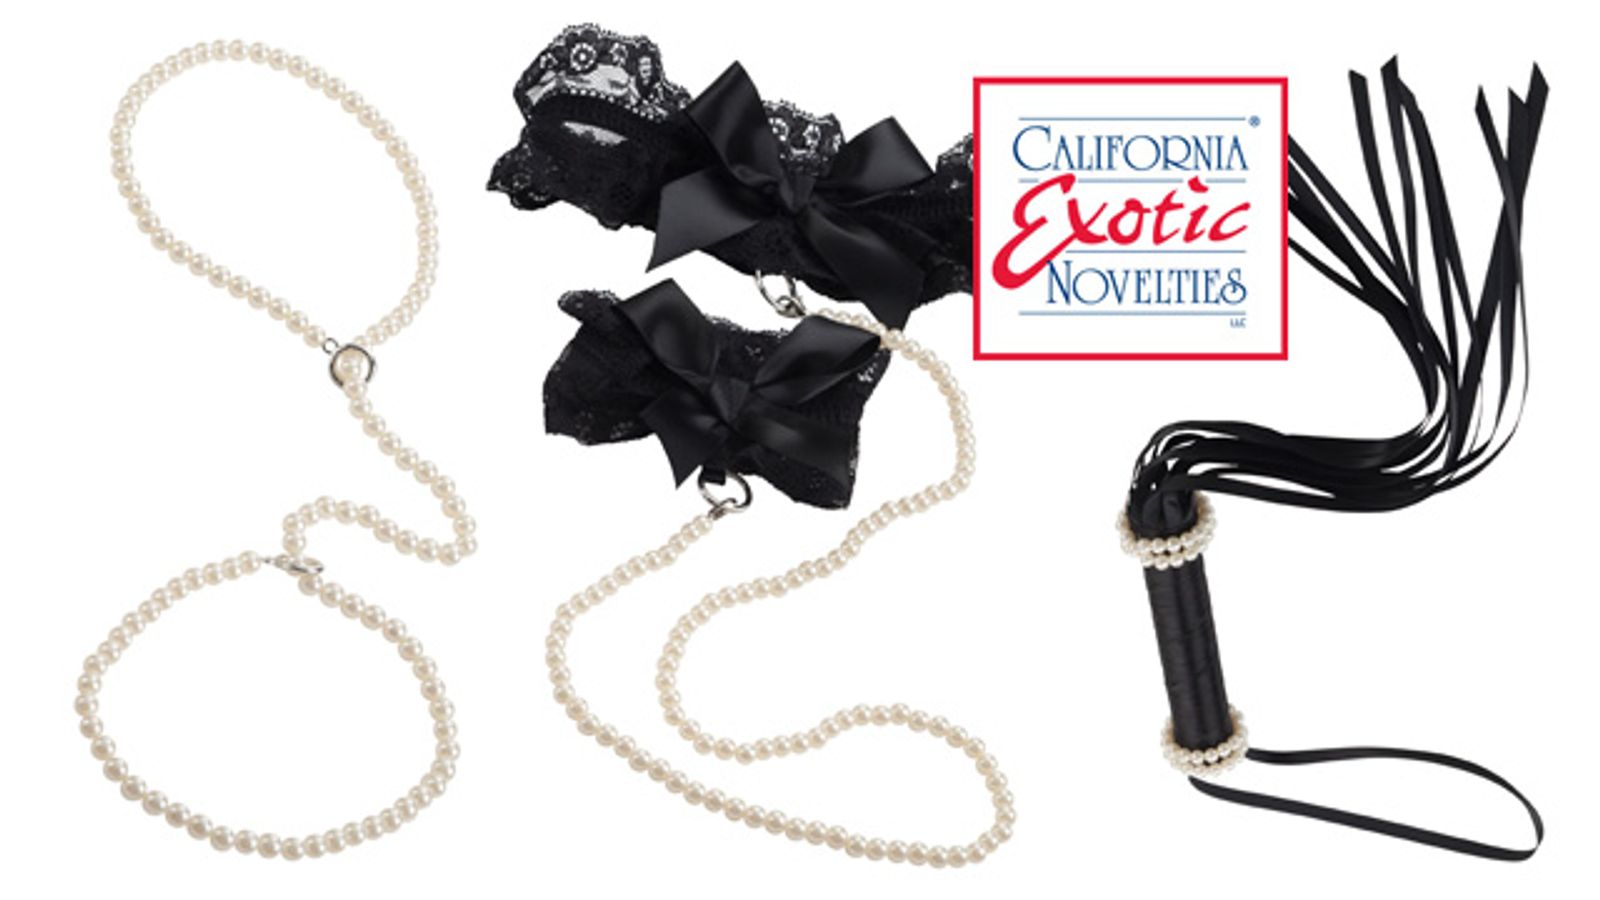 California Exotic Novelties Gets Playful With New Collection